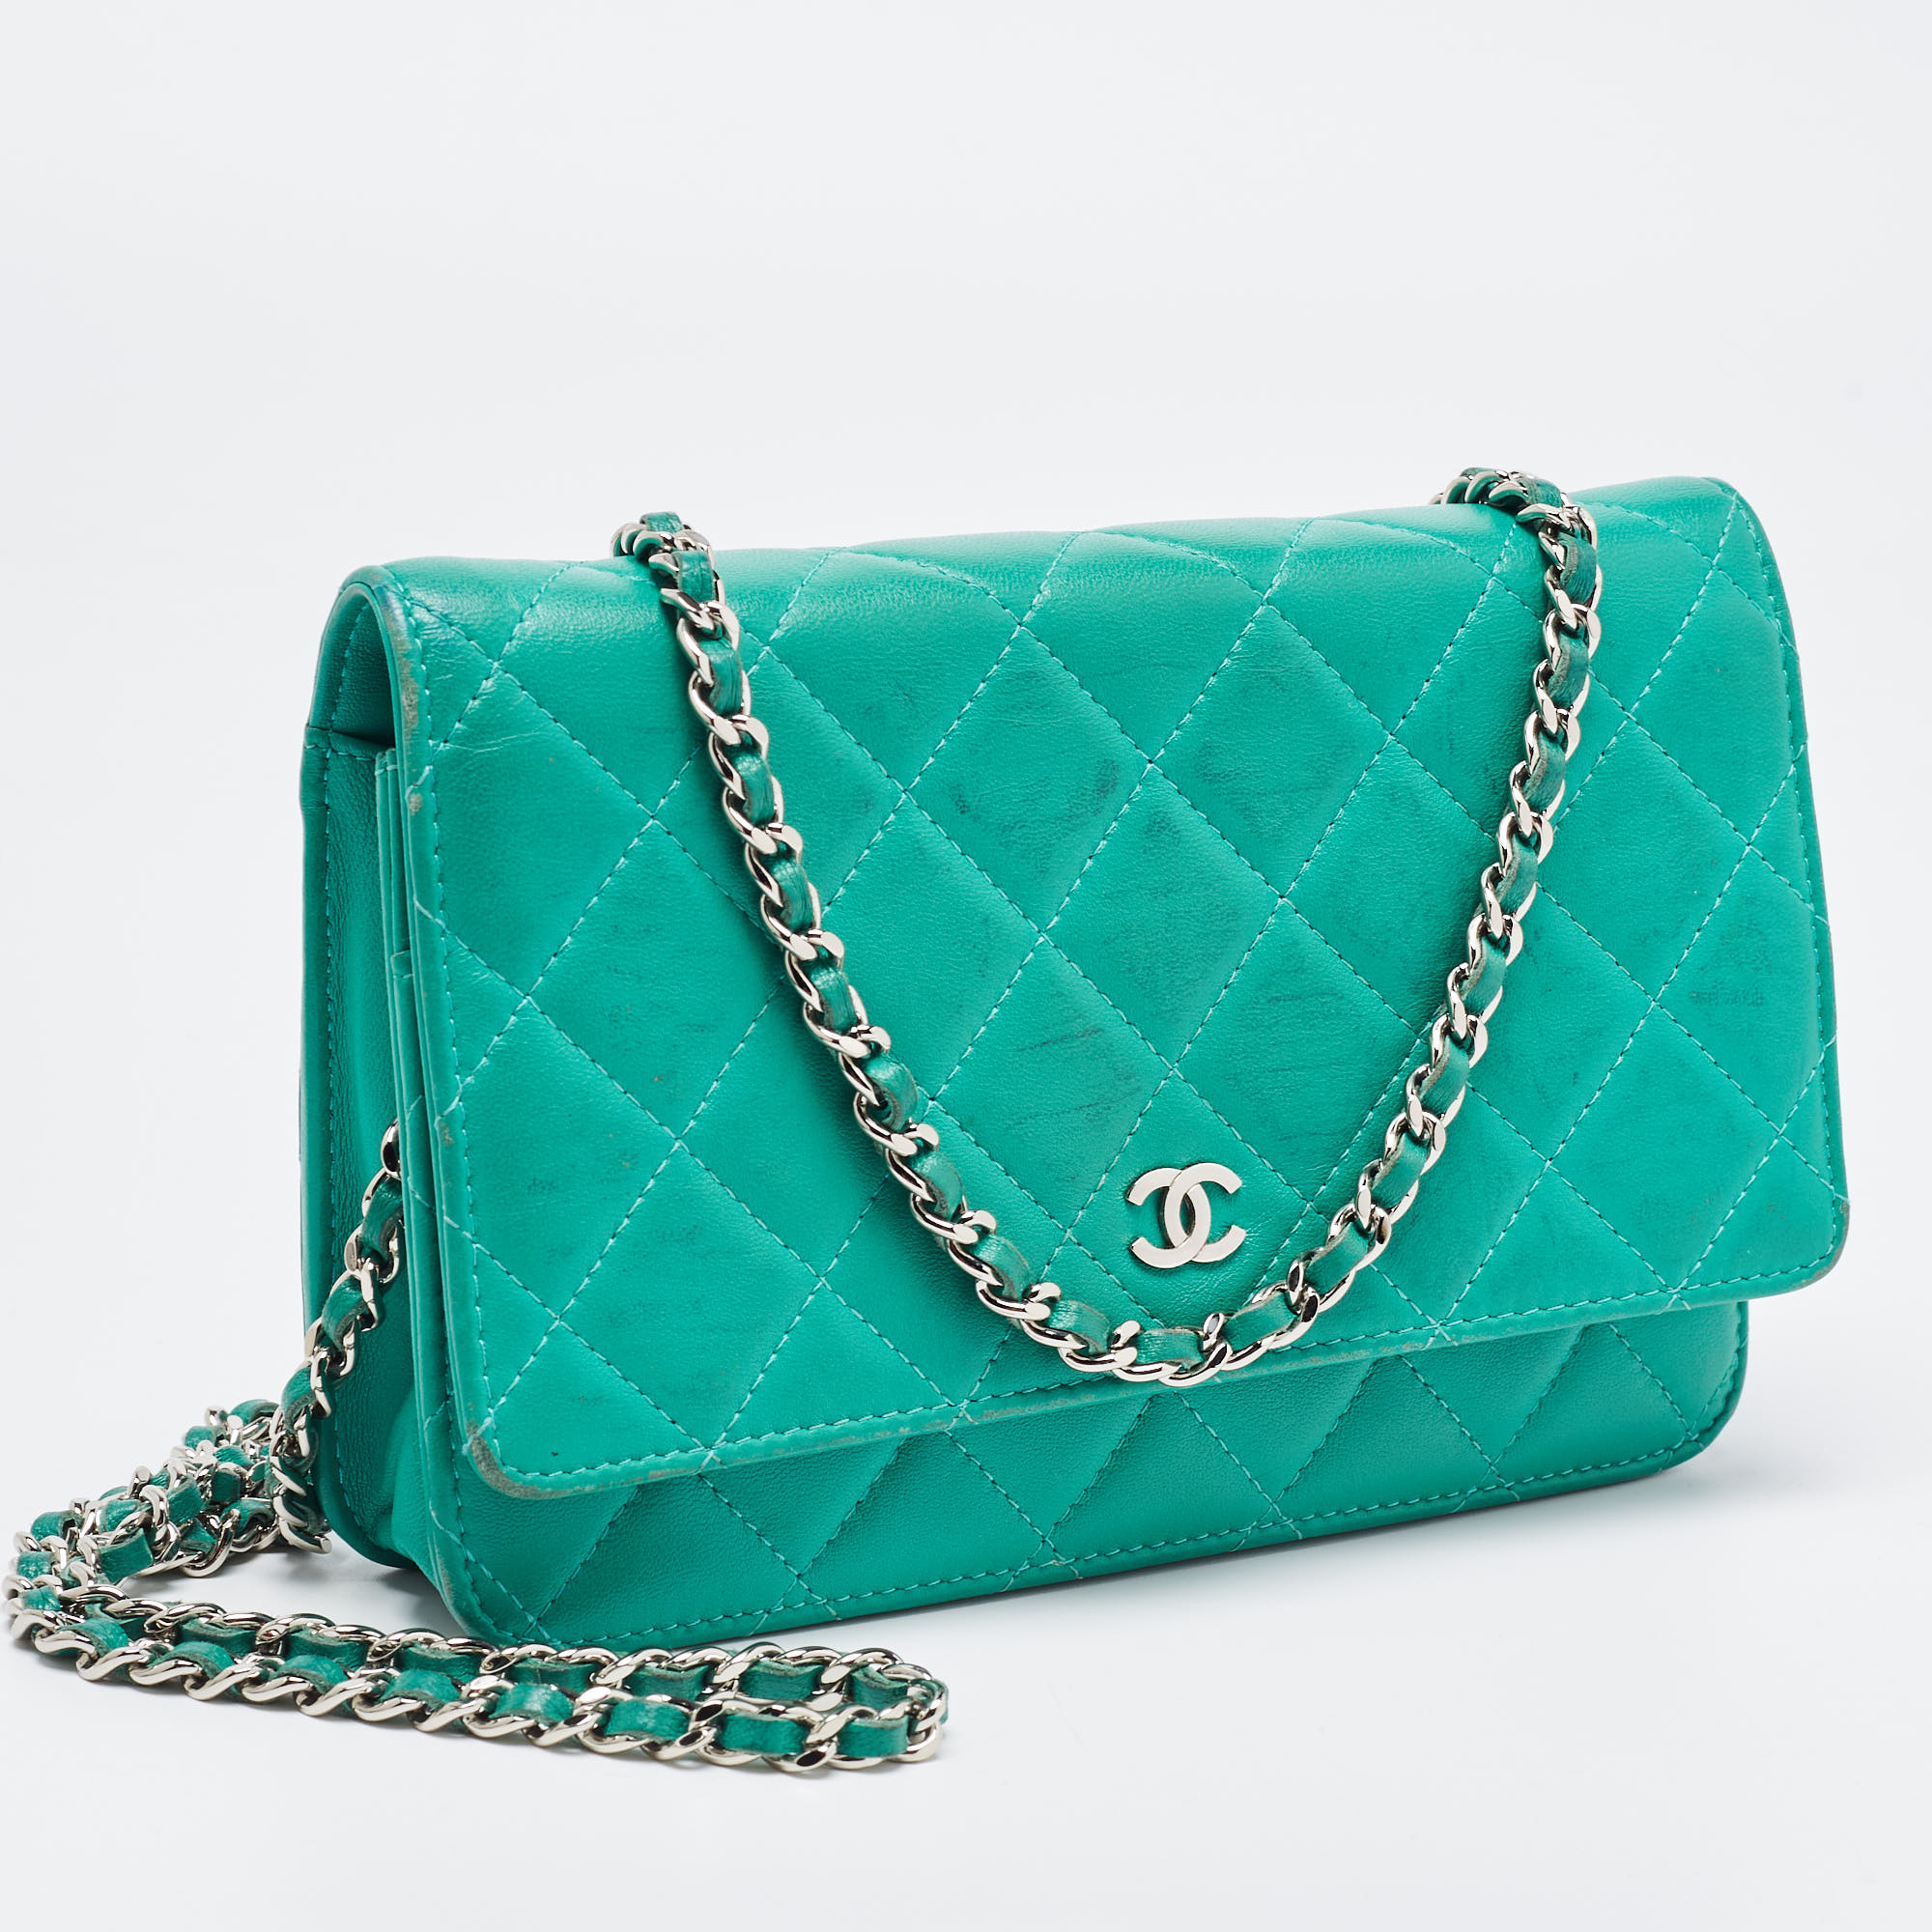 Chanel Green Leather CC Wallet On Chain